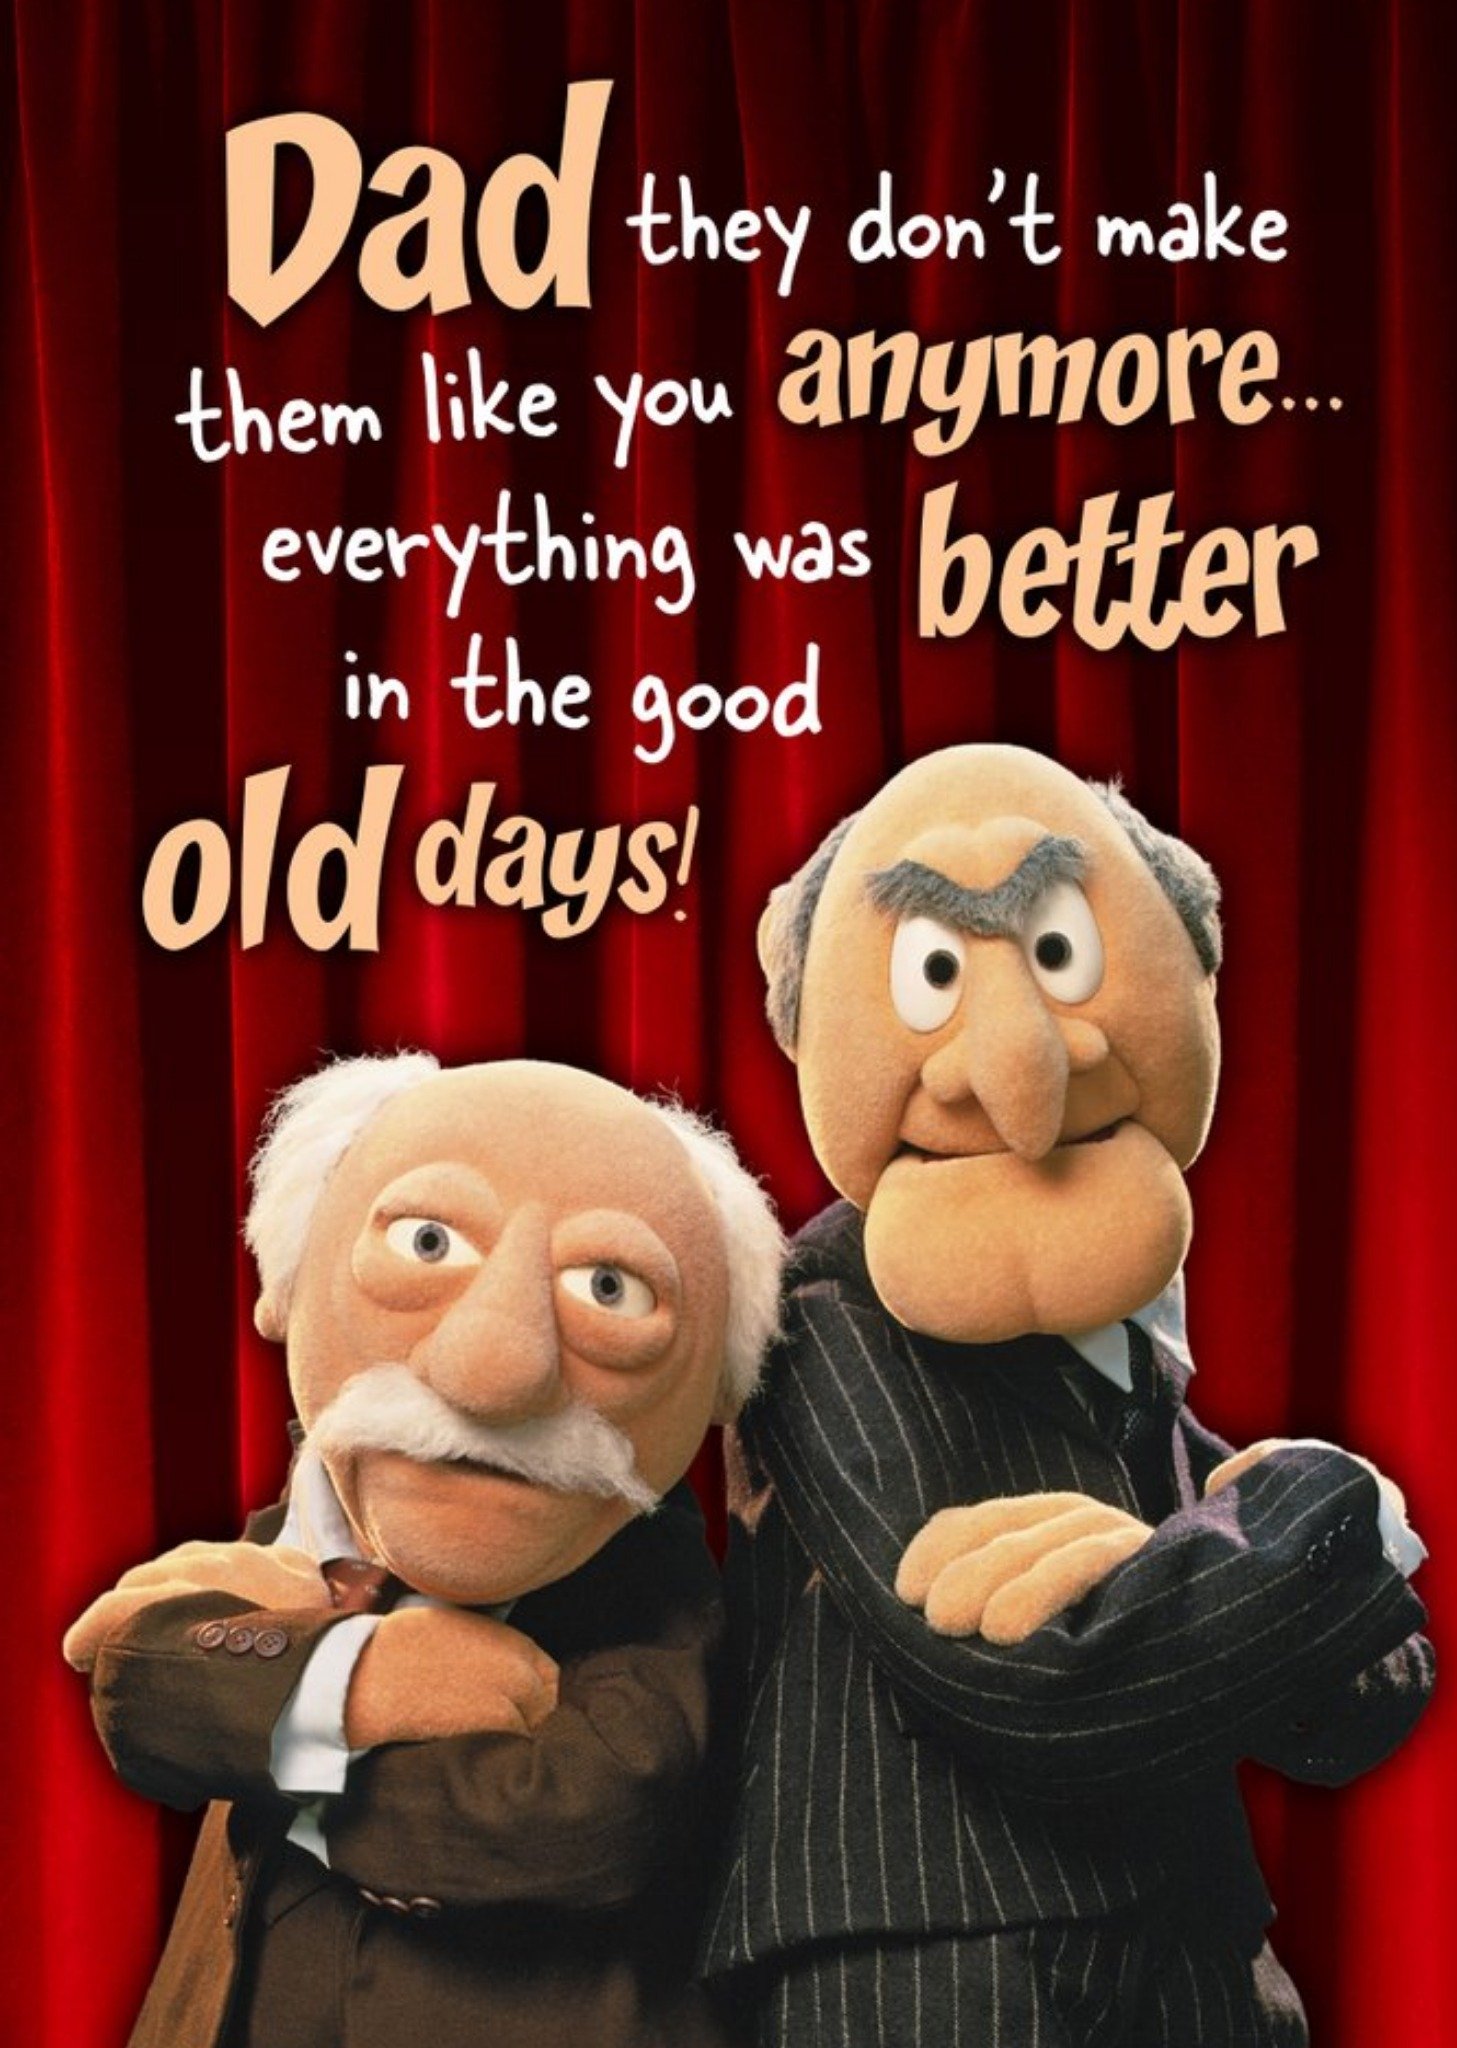 Disney Muppets Statler And Waldorf Funny Good Old Days Fathers Day Card Ecard